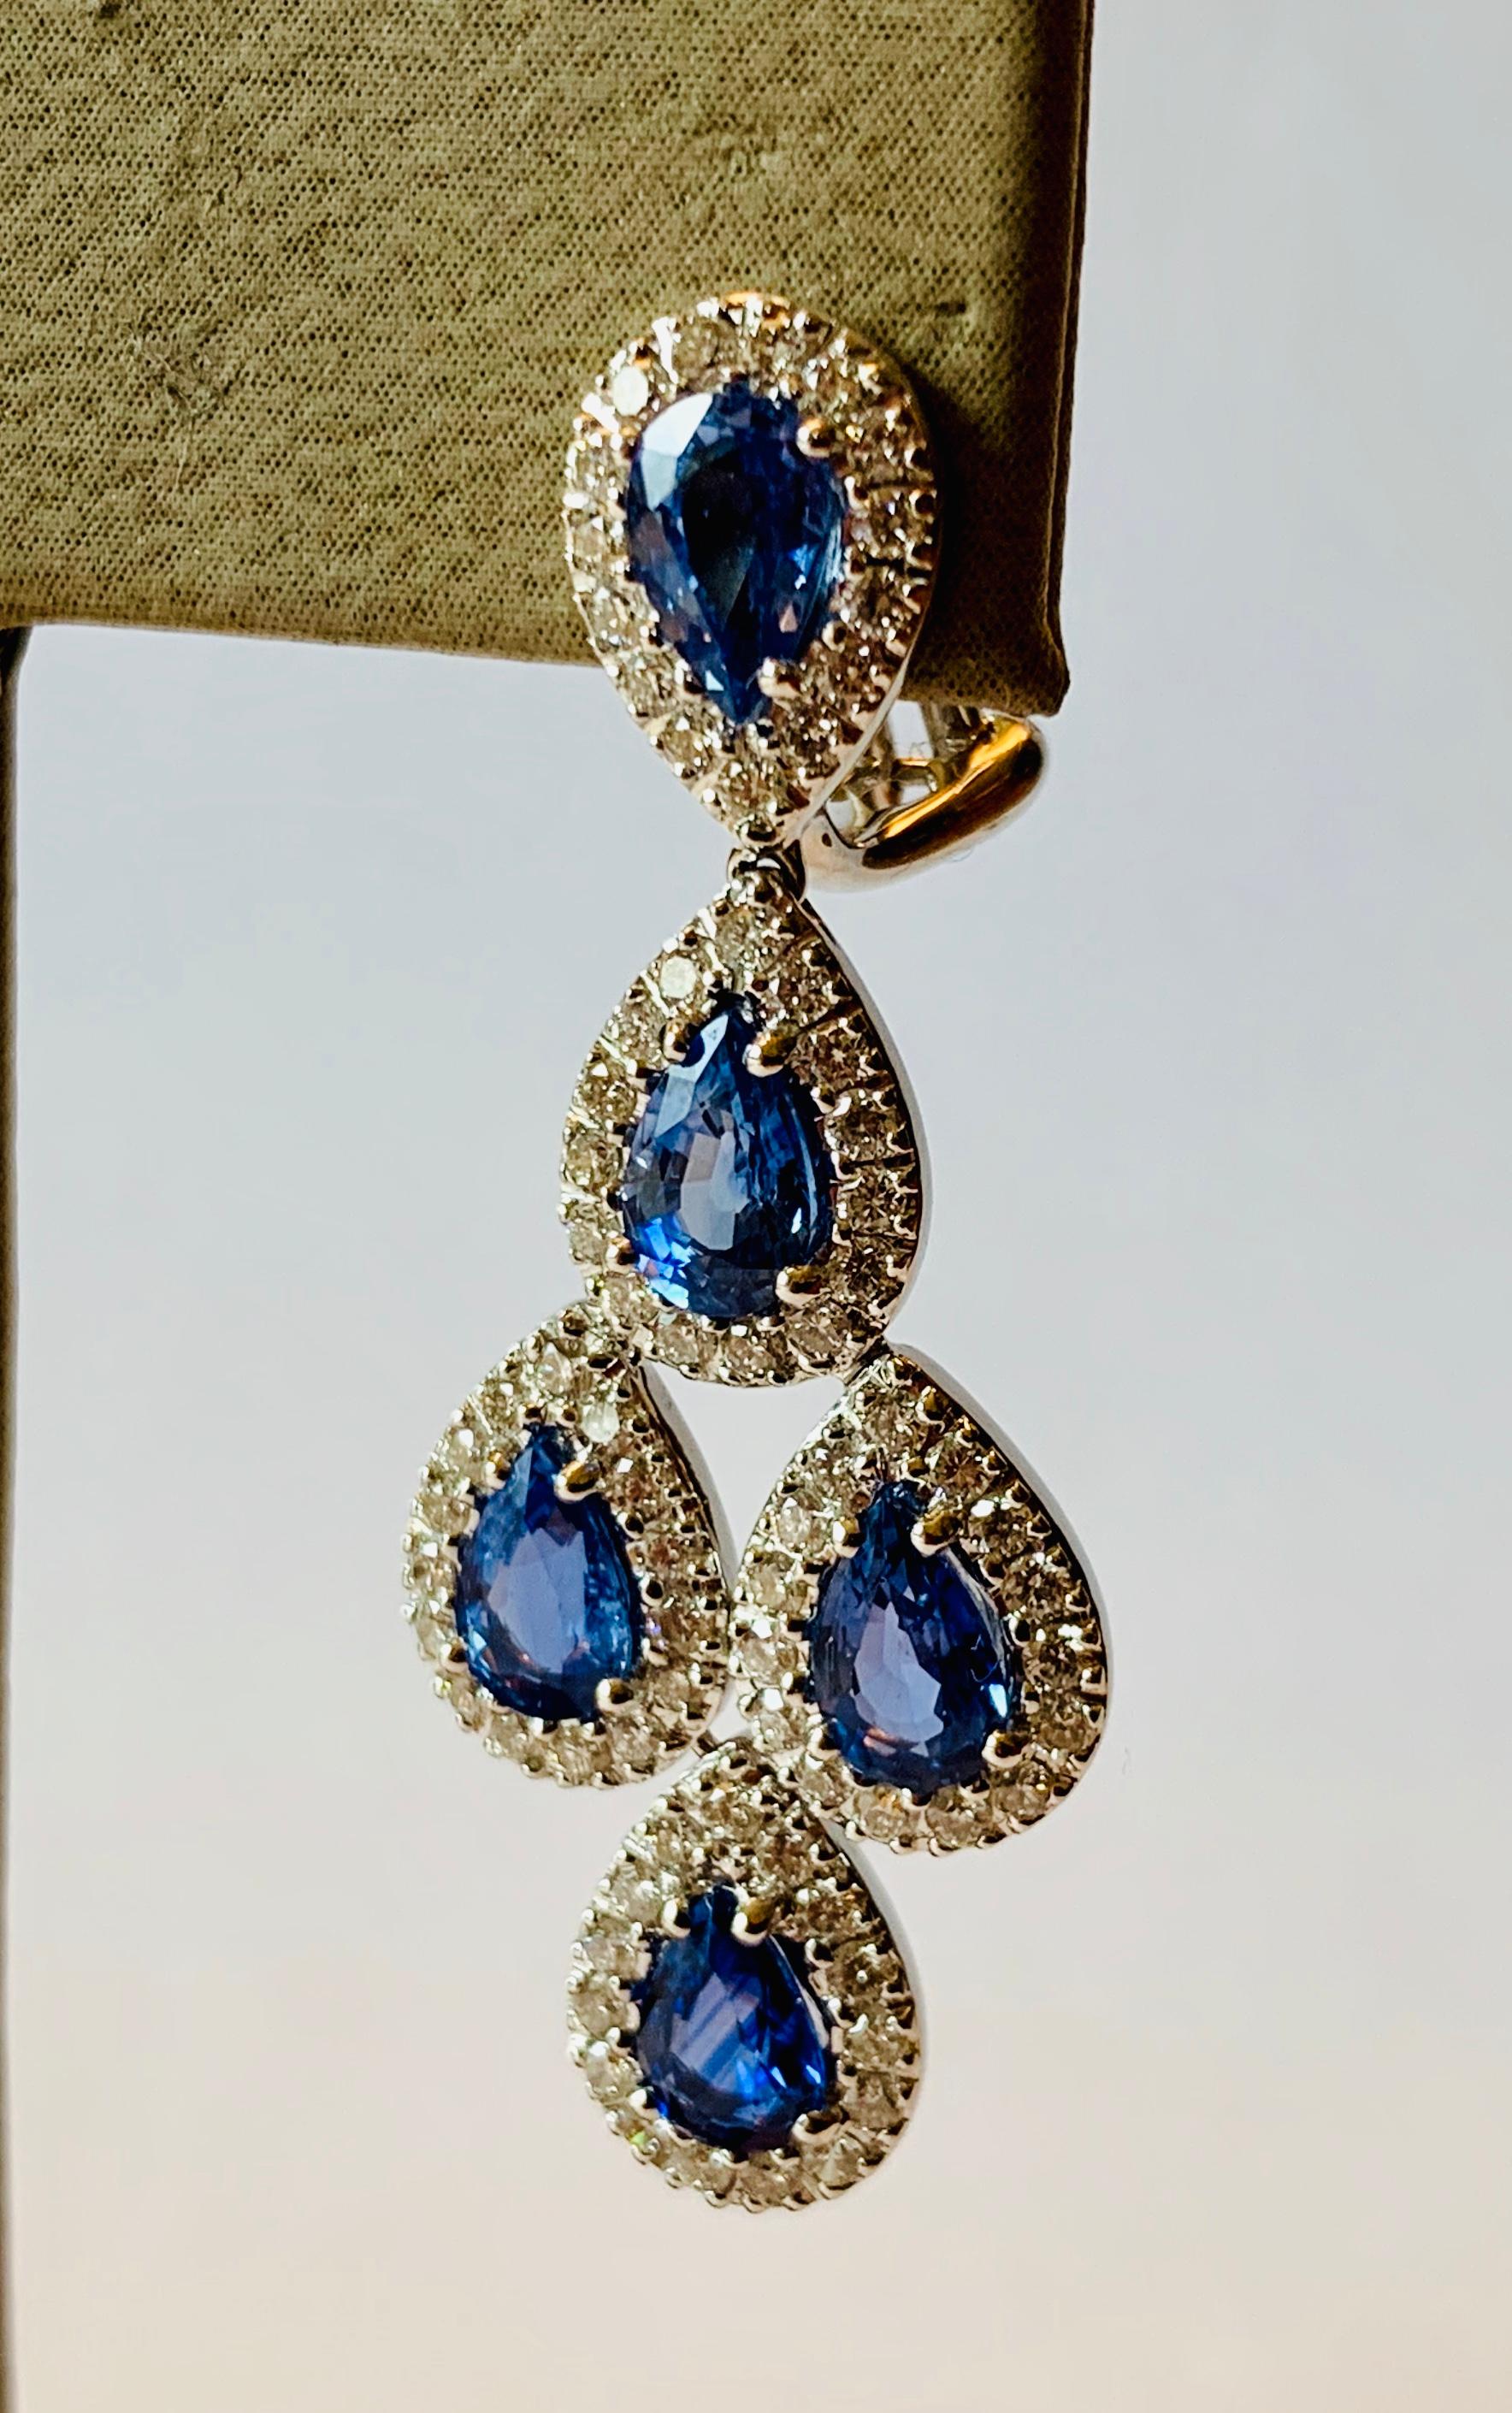 Sophisticated elegance! These earrings feature 10 pear shape blue Sapphires weighing 4.82 ct., accented by 150 brilliant cut Diamonds totaling 1.50 ct, G, vs. These chandelier drop earrings are set in 18K white gold with omega clip backings.